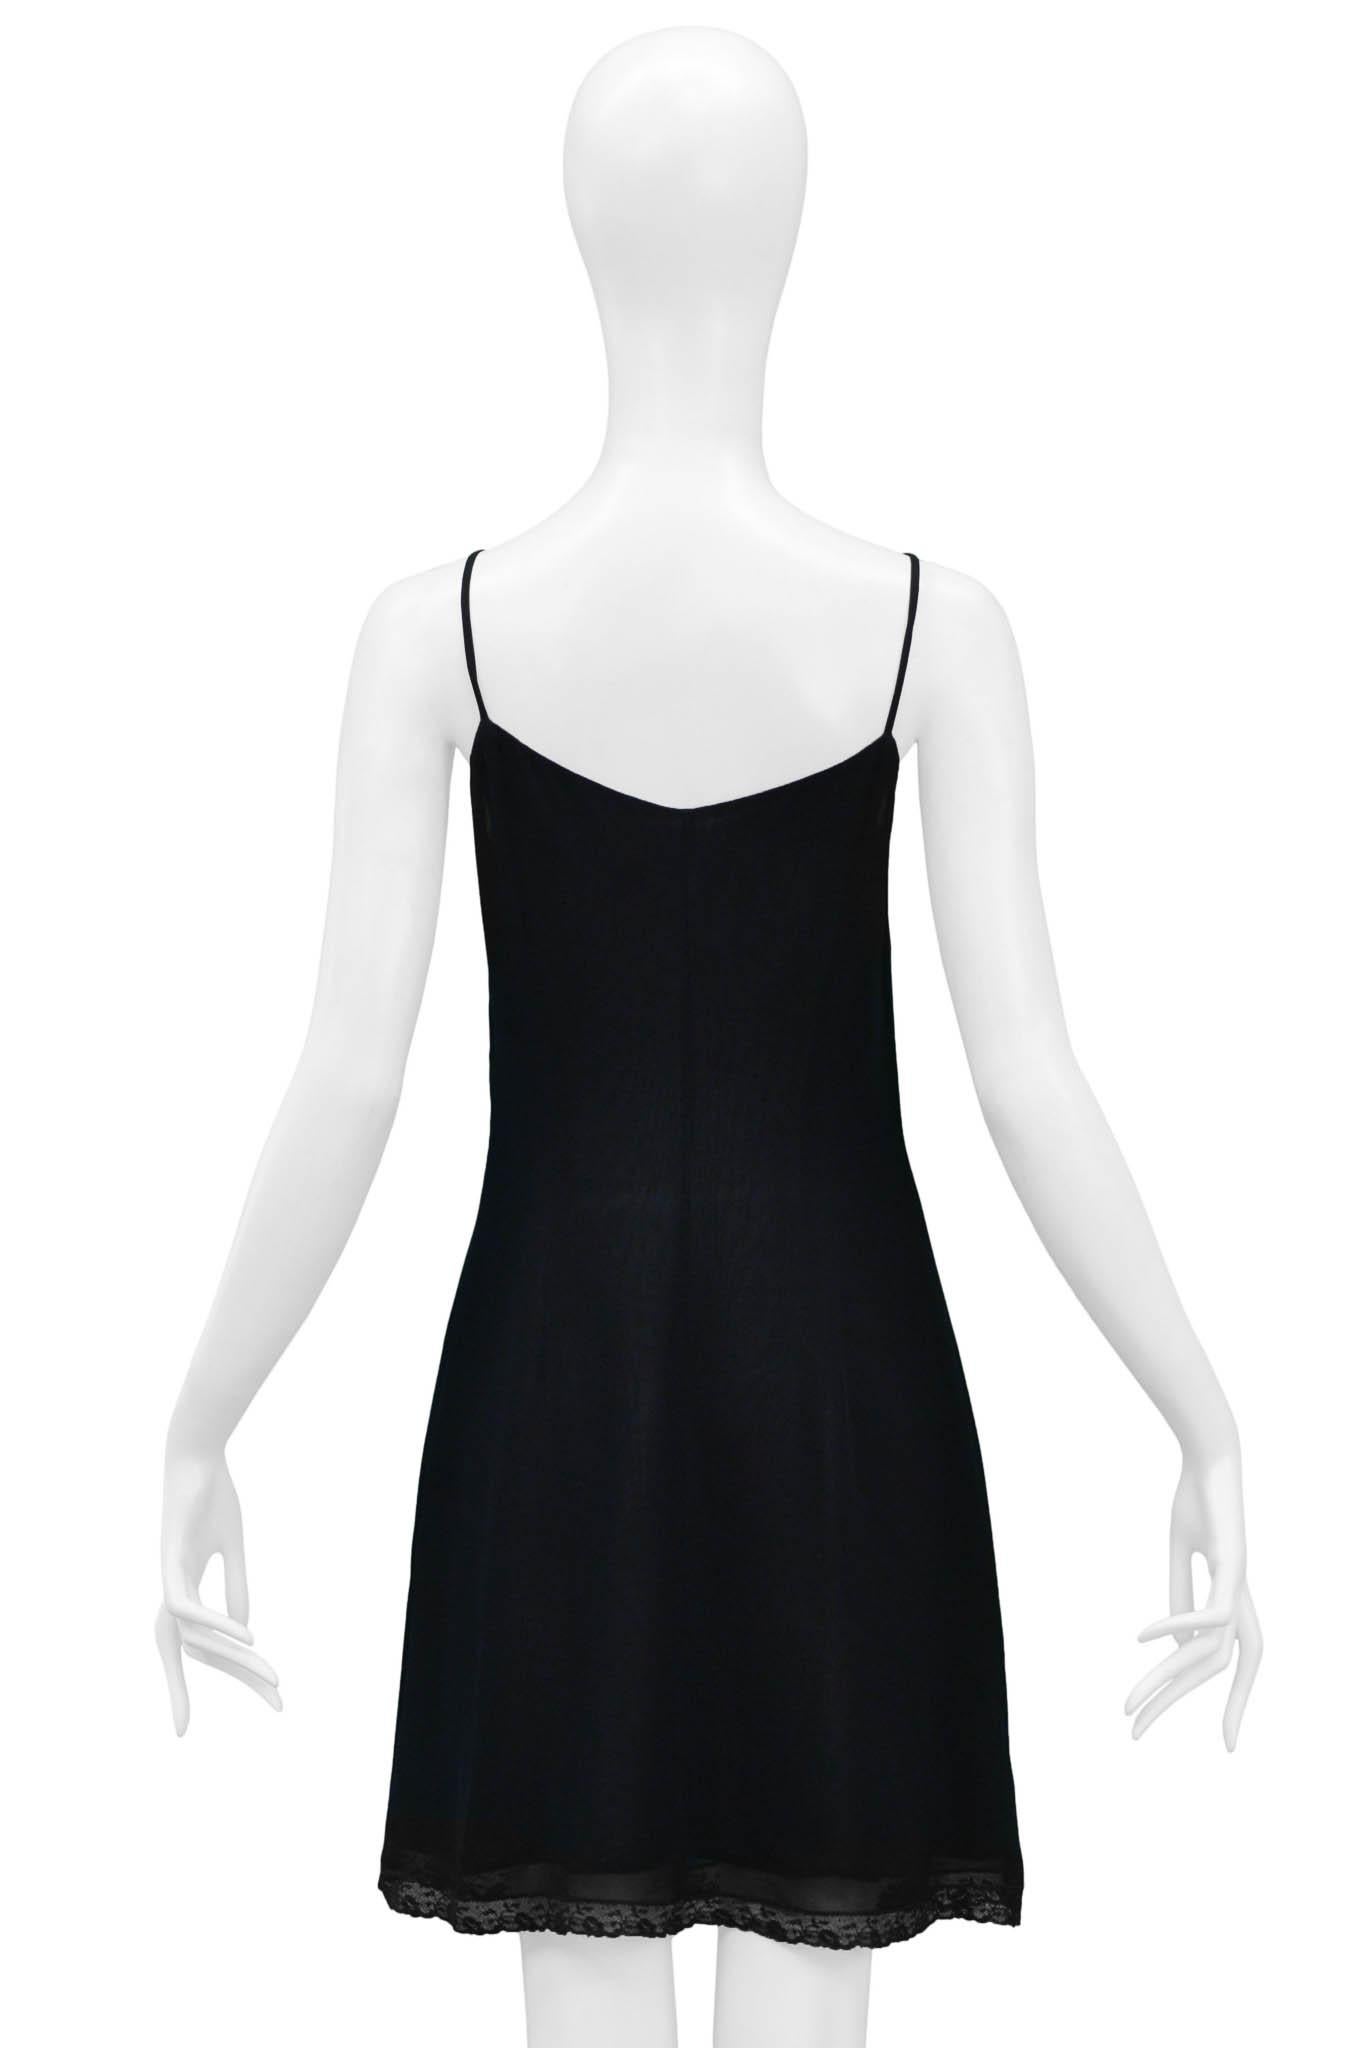 Resurrection Vintage is excited to offer a vintage Dolce & Gabbana black slip dress featuring spaghetti straps, lace trim at the hem, and an invisible zipper on the side seam. 

Dolce & Gabbana
Size 44
90% Rayon 10% Nylon
Excellent Vintage